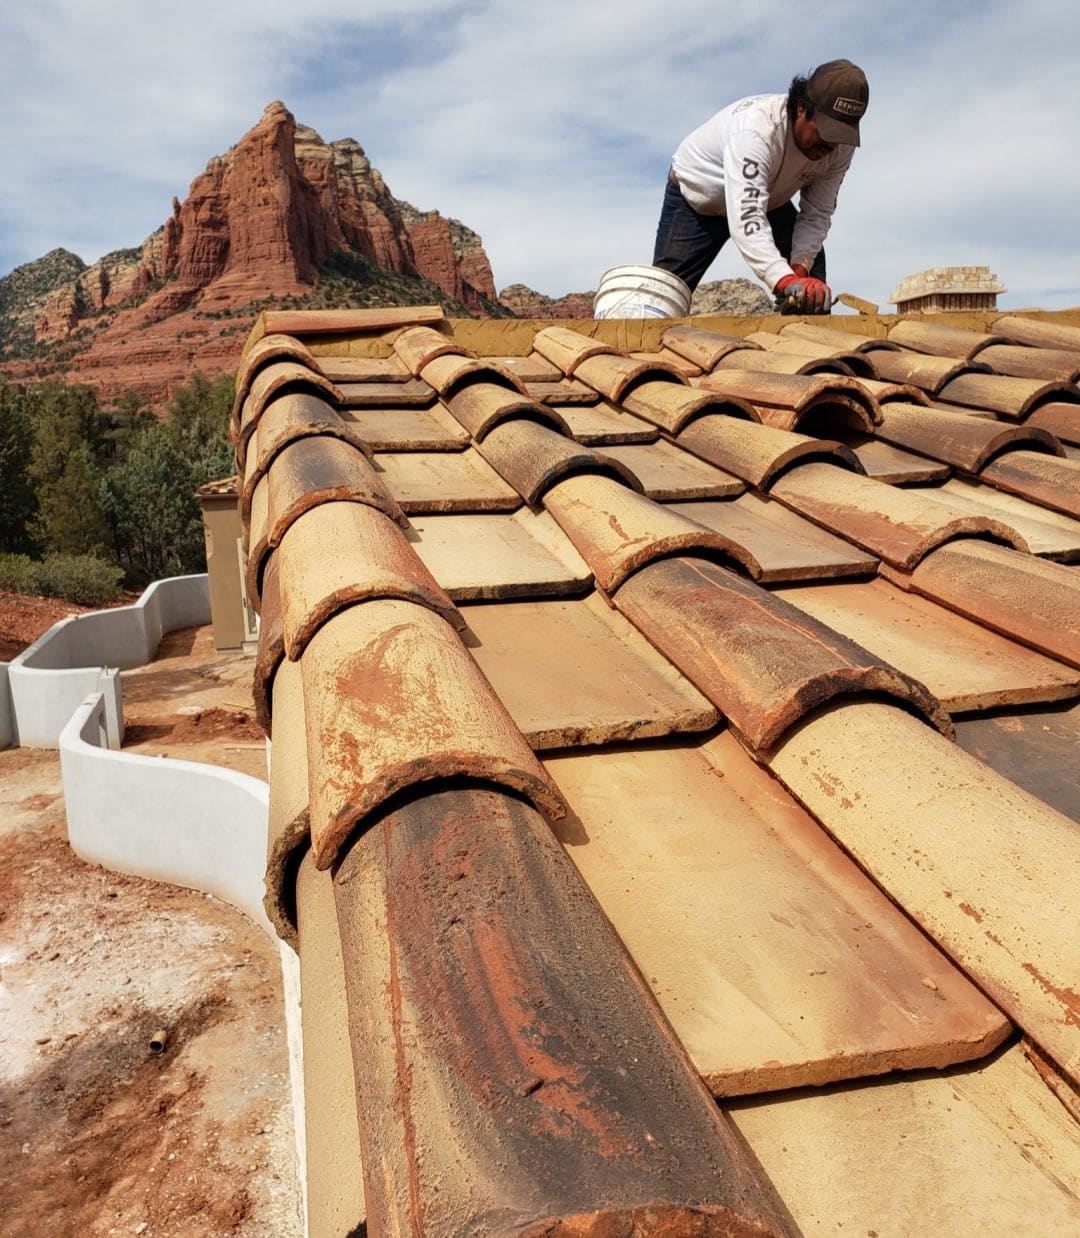 A Behmer roofer installing a new tile roof in Scottsdale, Arizona.